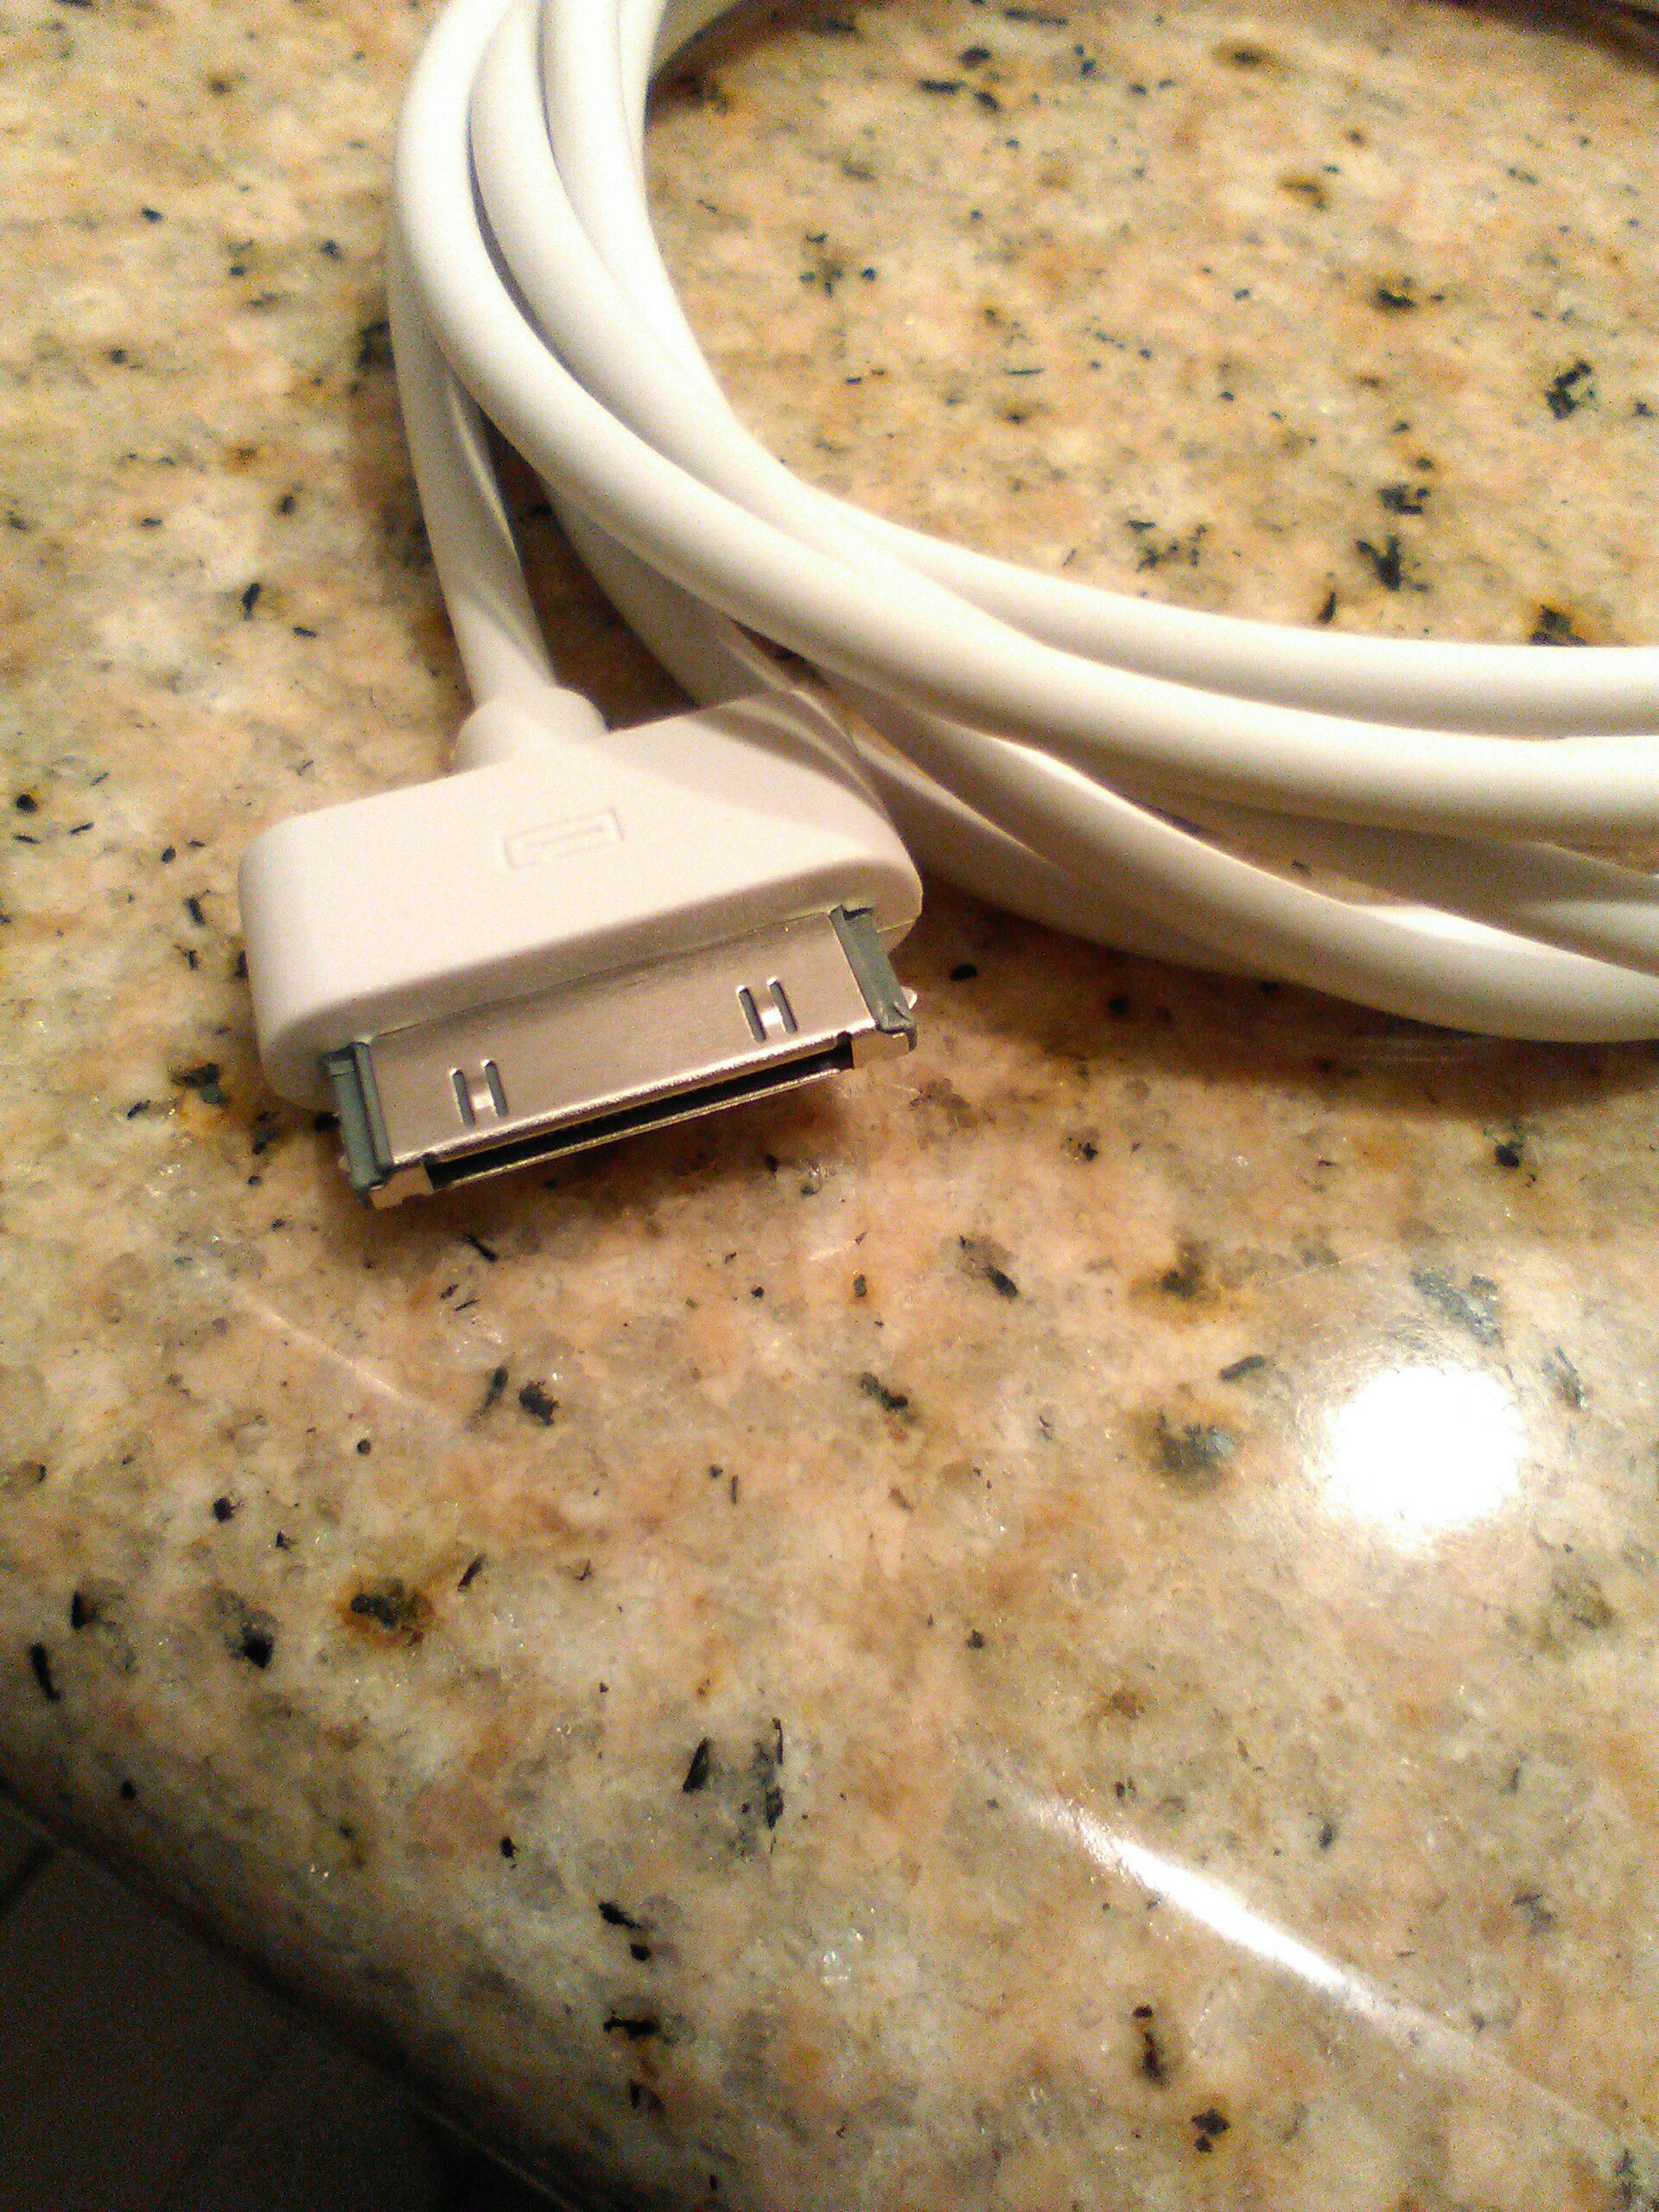 Brand new 10 feet long iPod charger